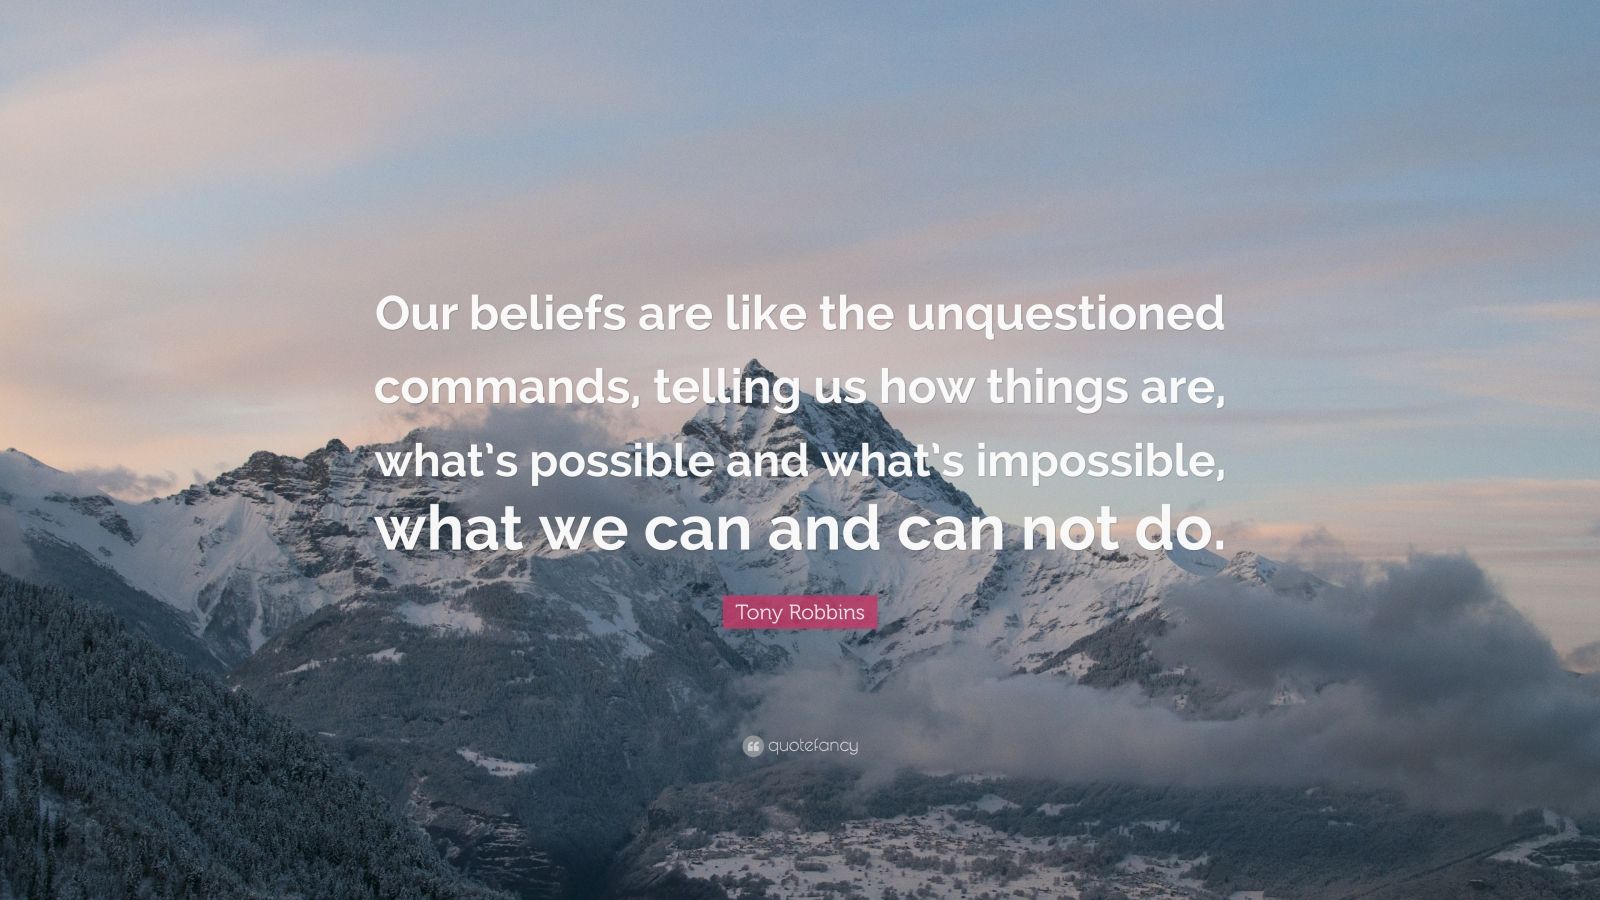 Tony Robbins Quote: “Our beliefs are like the unquestioned commands ...